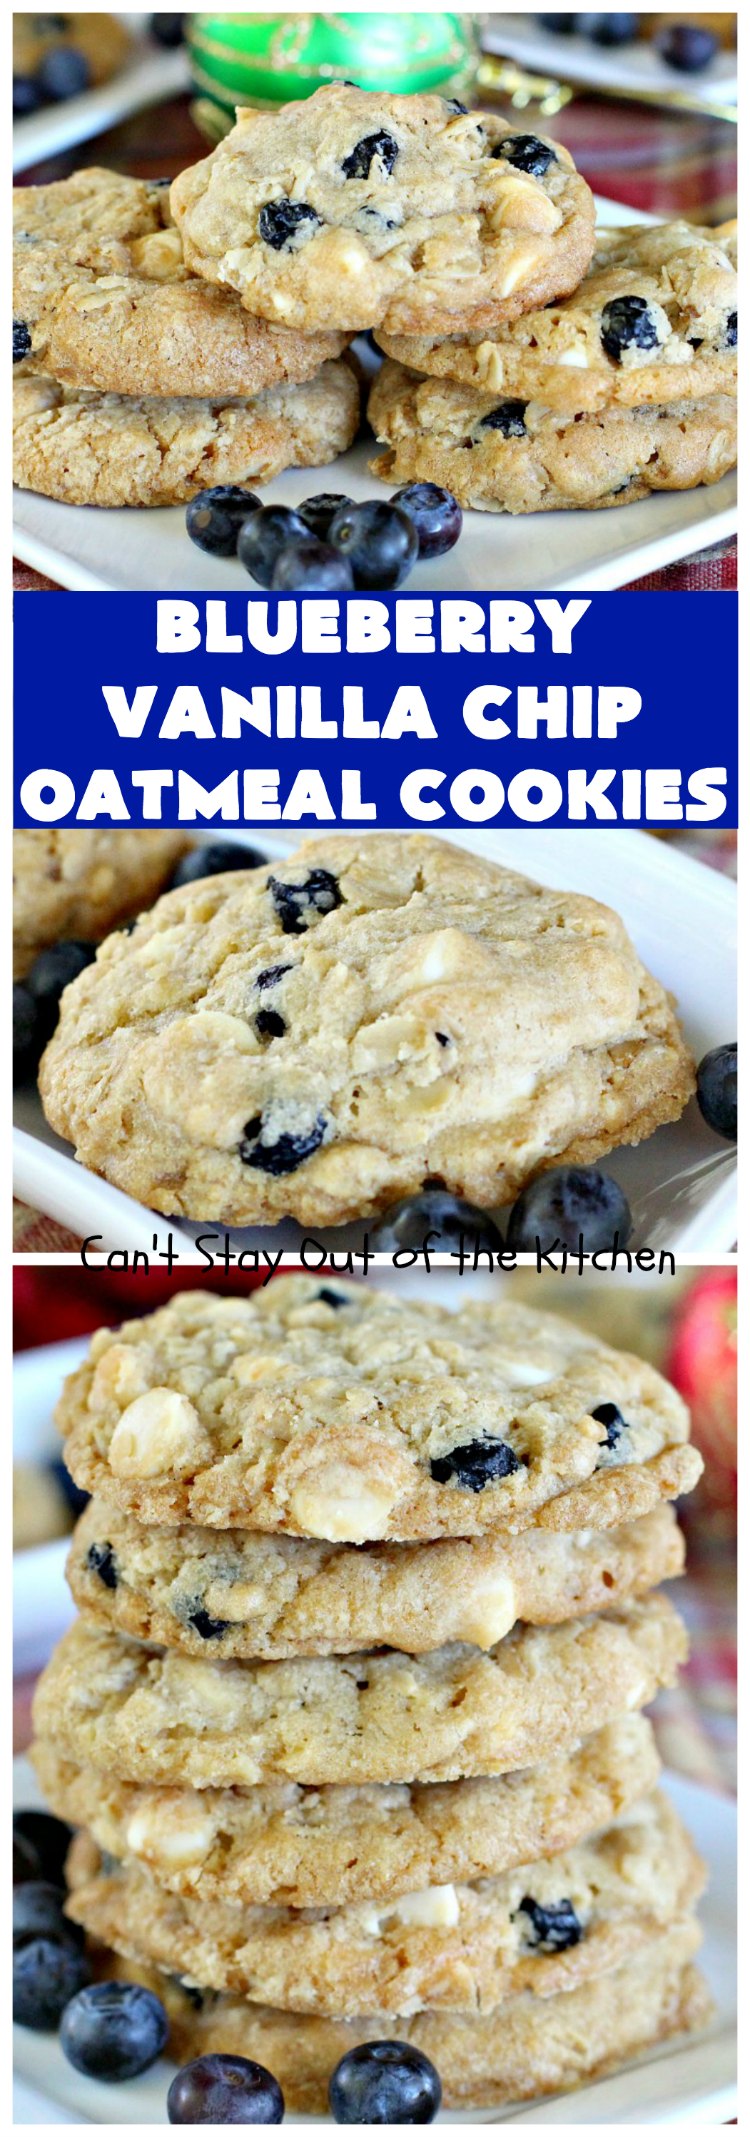 Blueberry Vanilla Chip Oatmeal Cookies | Can't Stay Out of the Kitchen